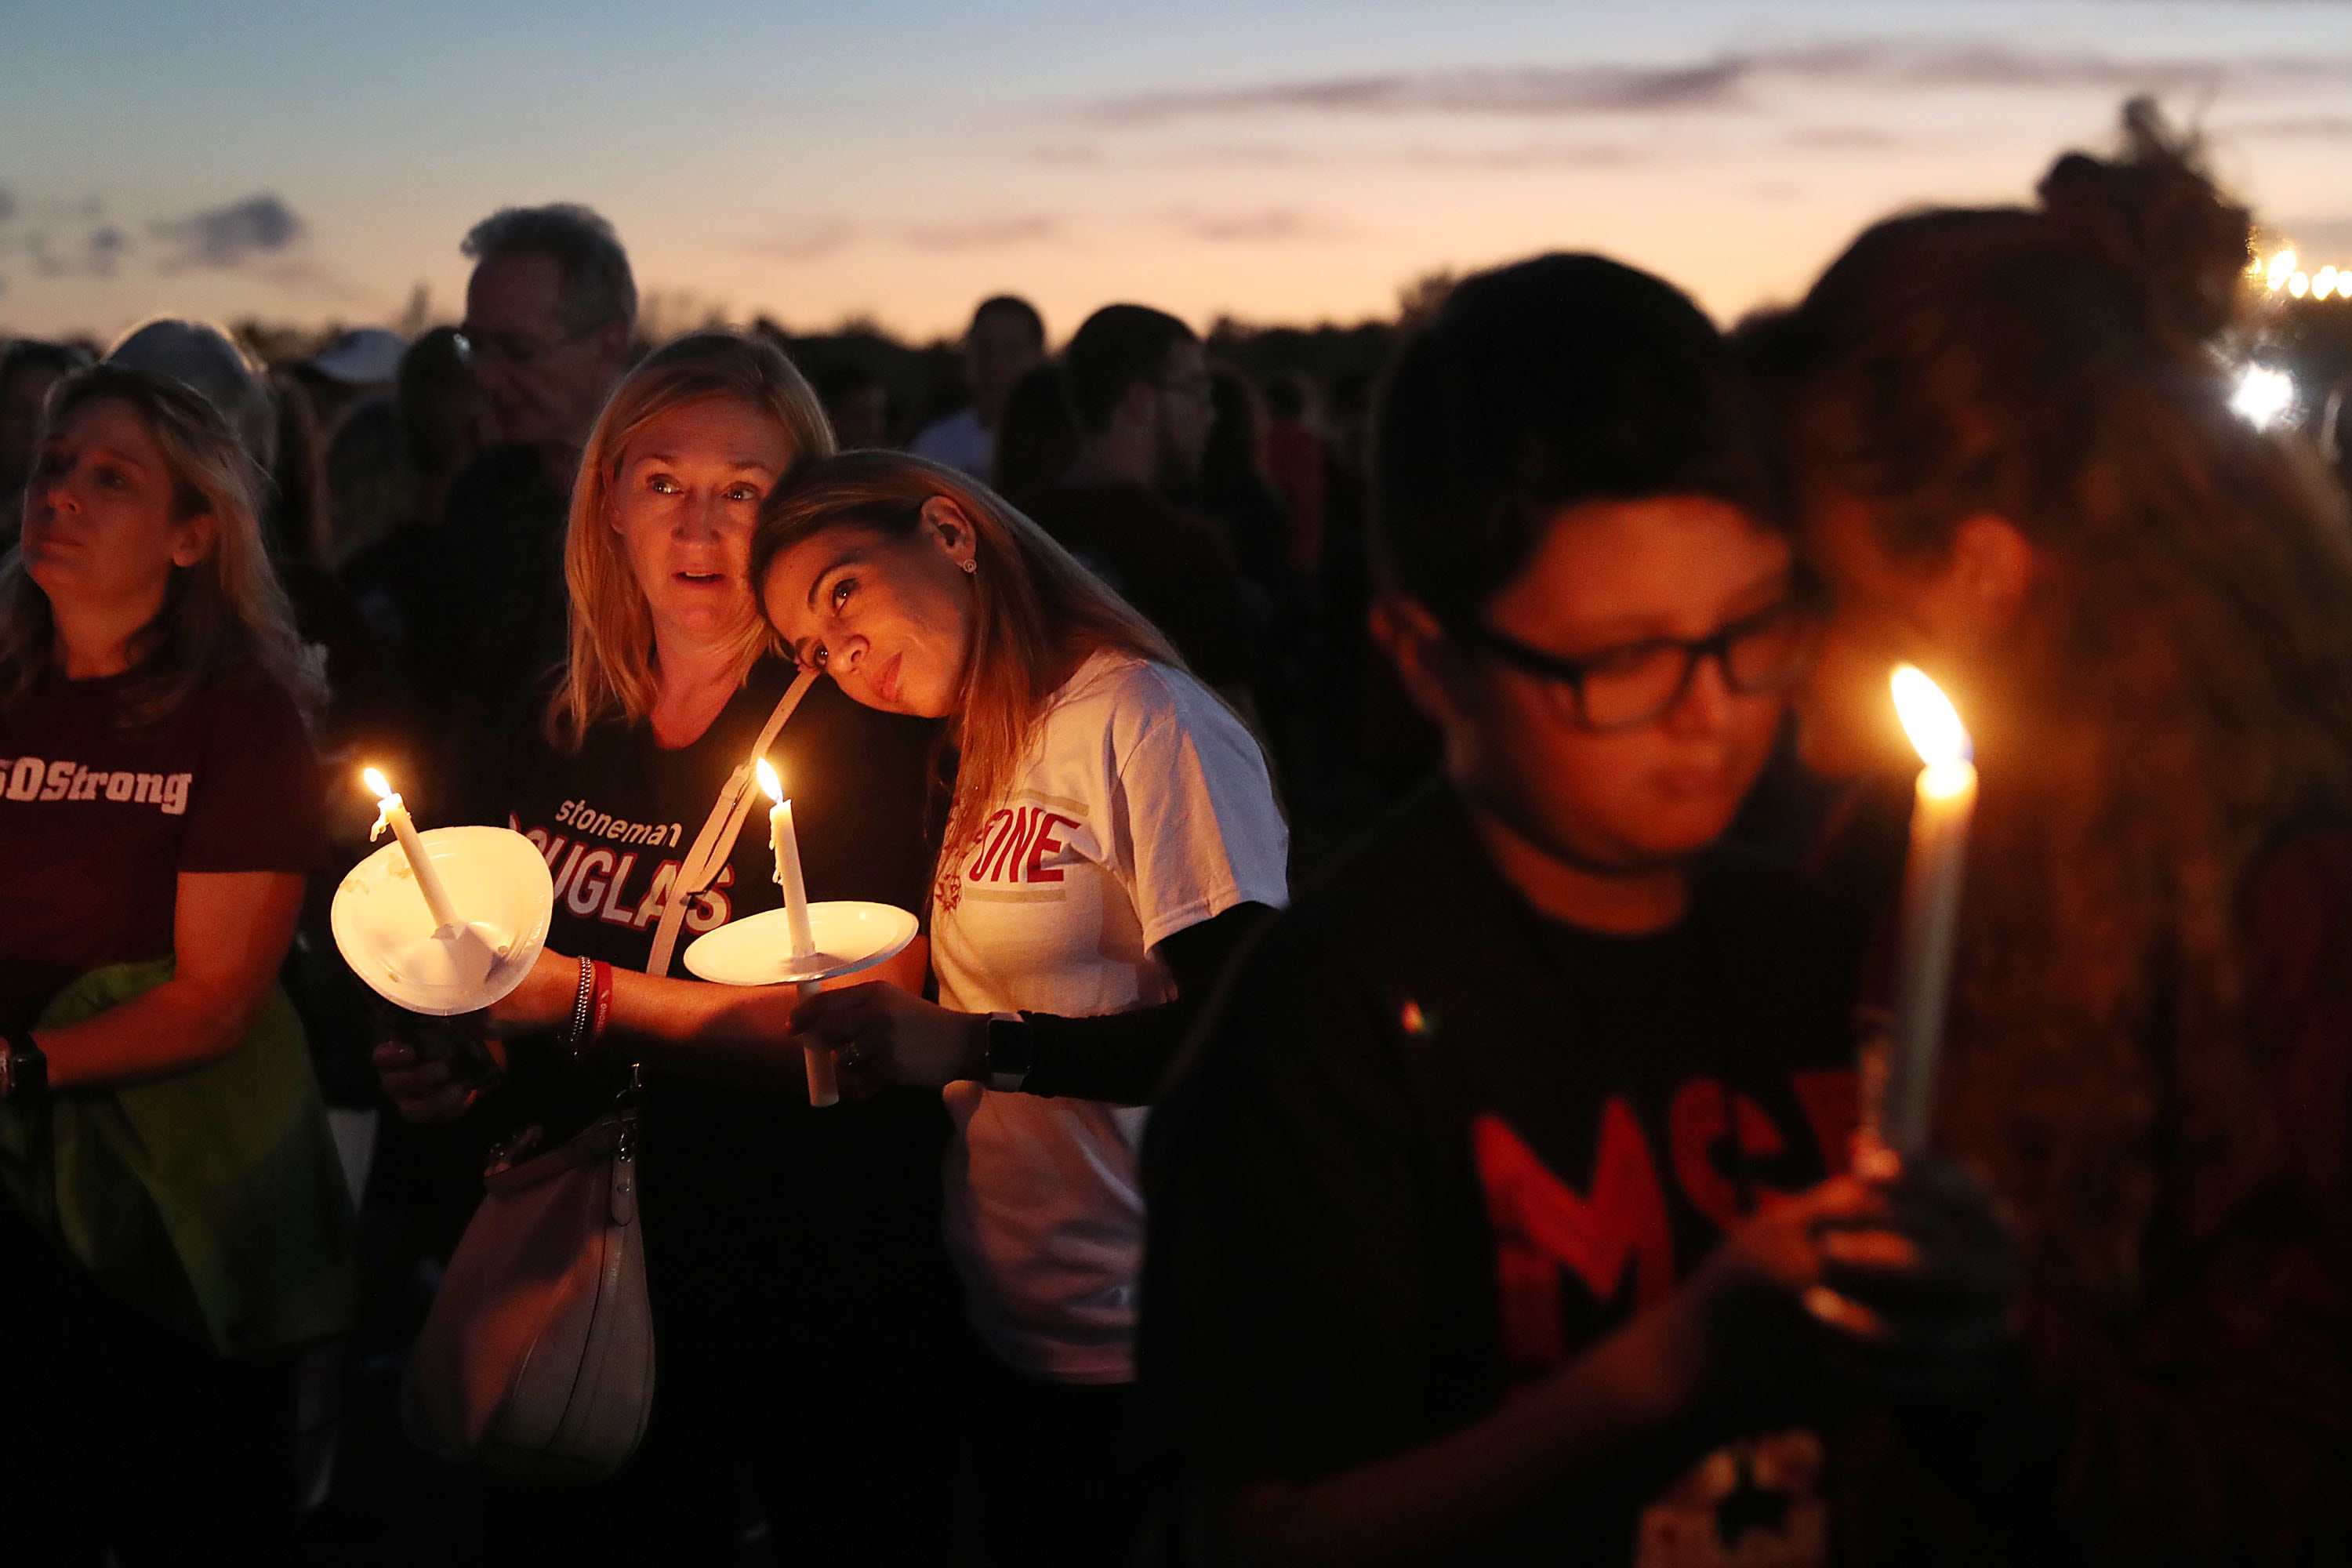 Parents hold their children during a candlelight vigil for victims of a school shooting.